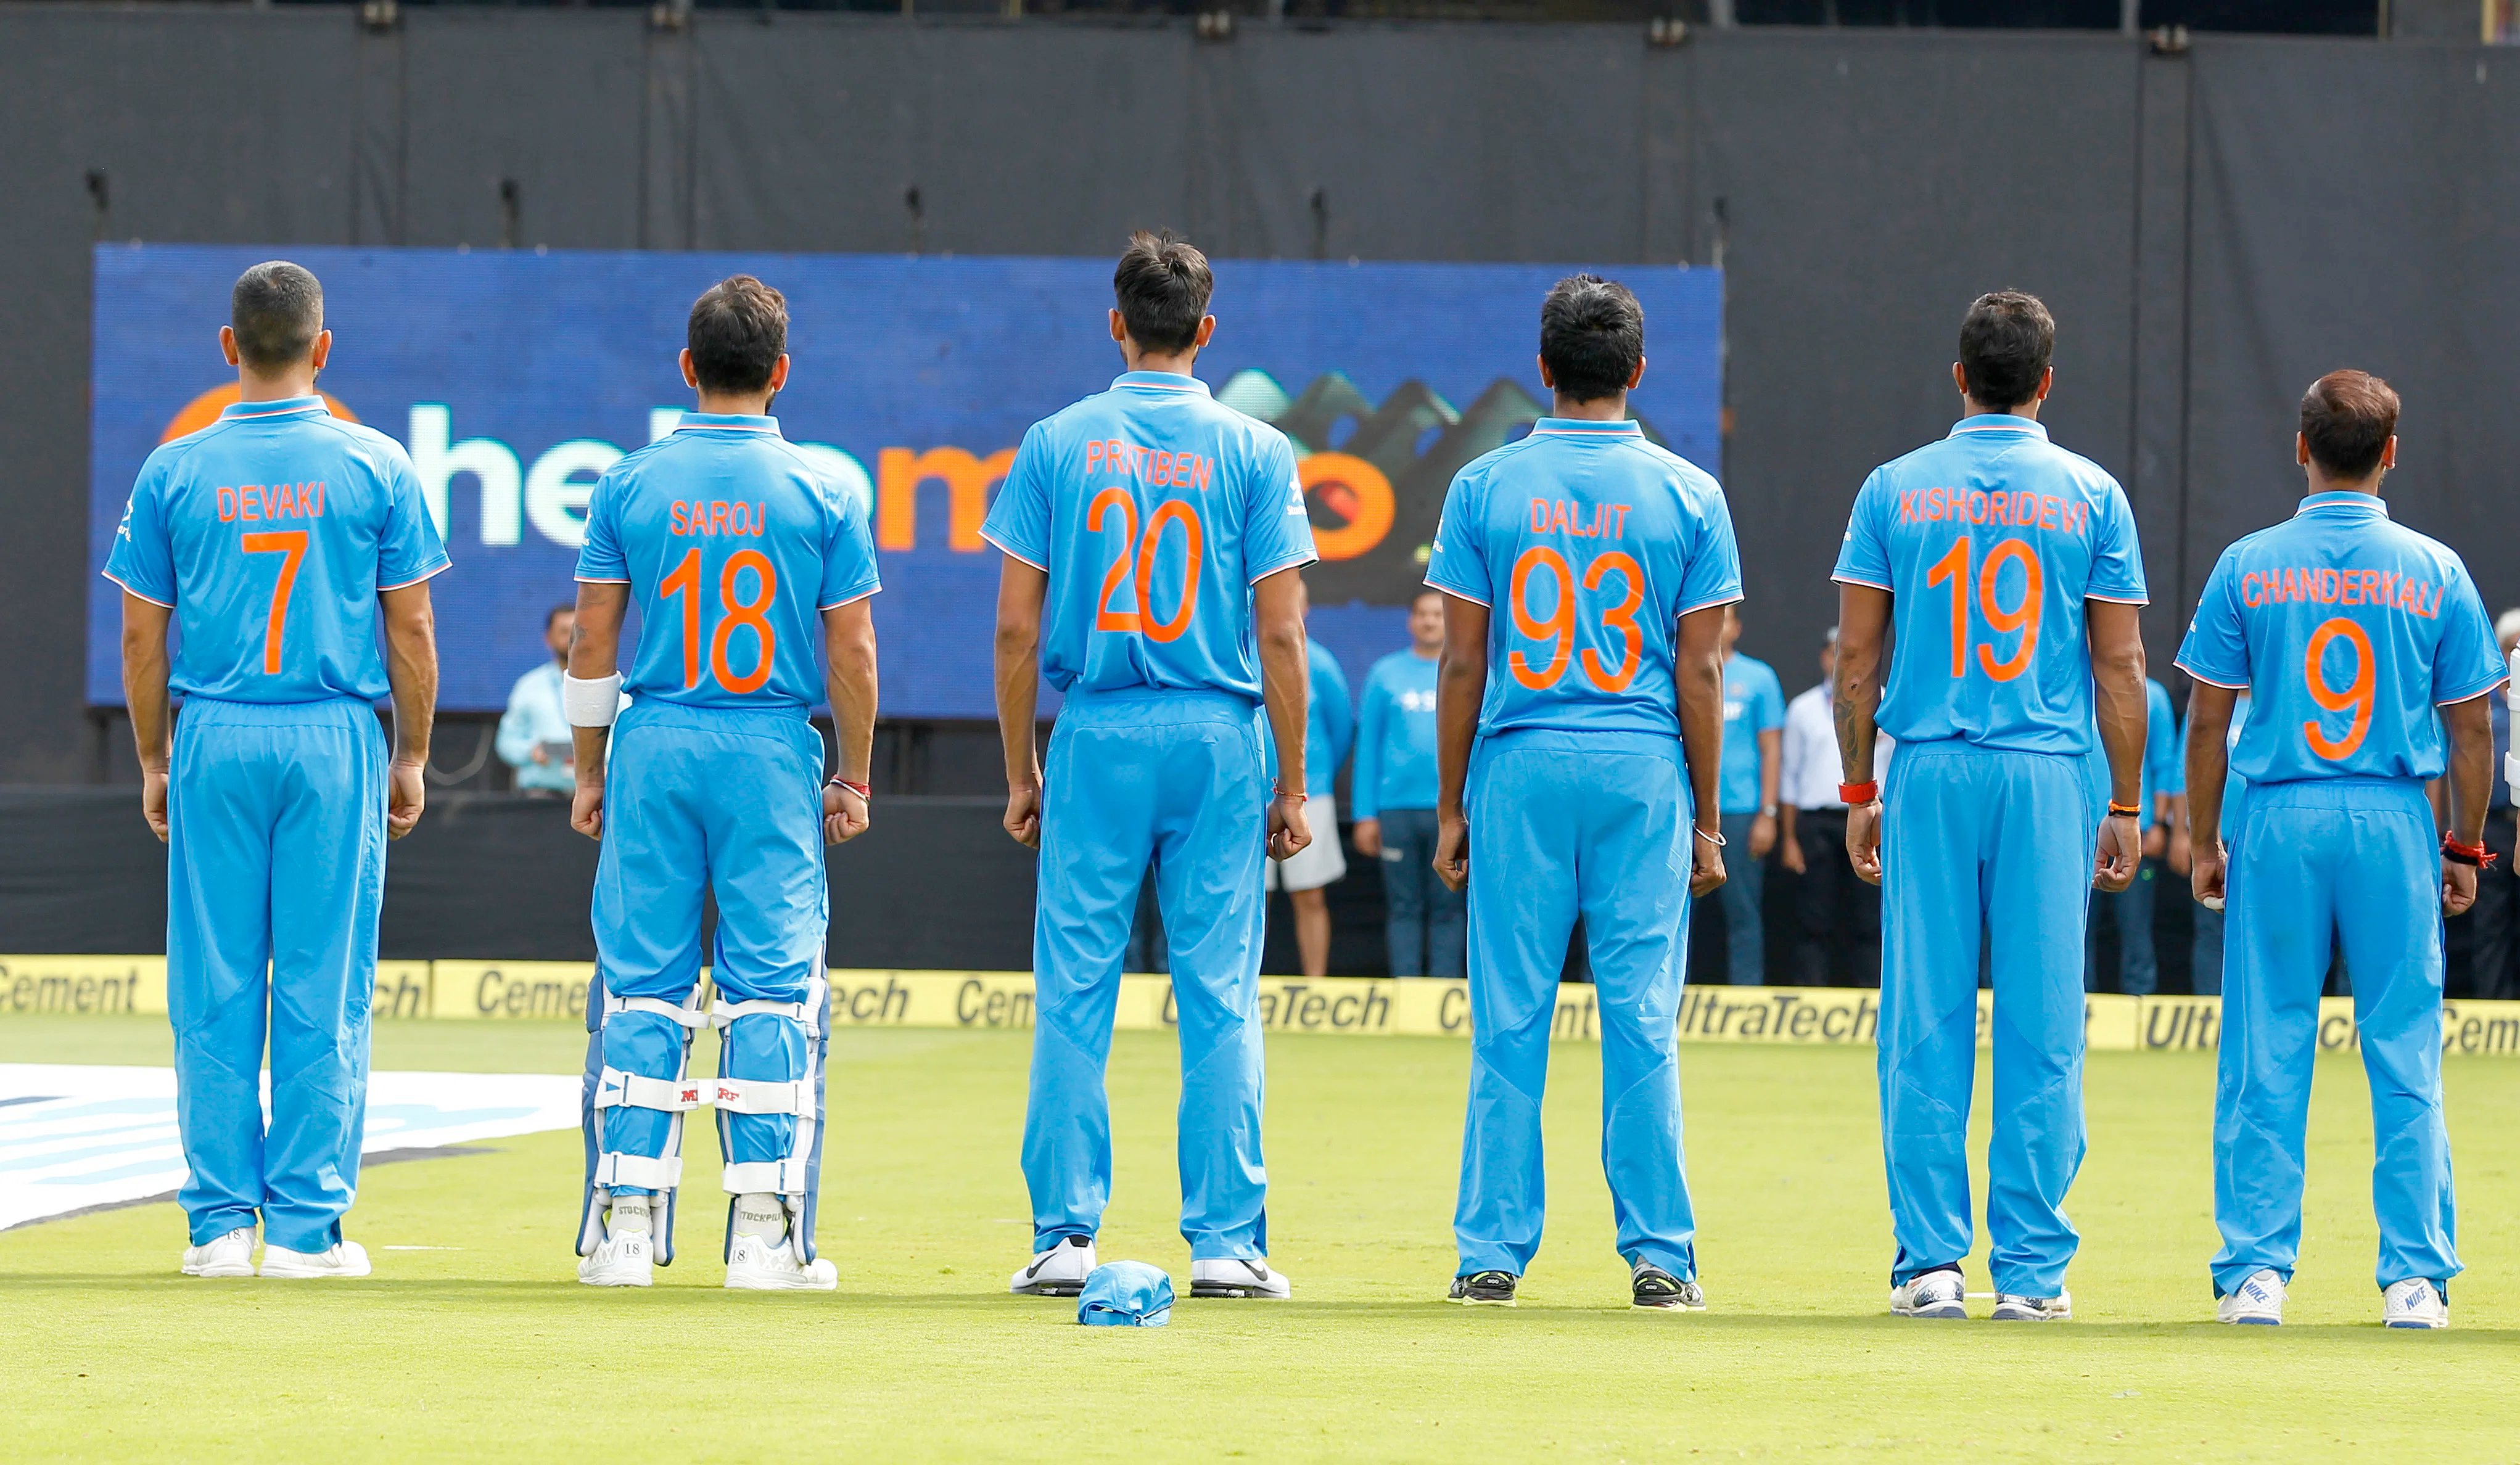 Indian team sport their mothers' names in their jersey.